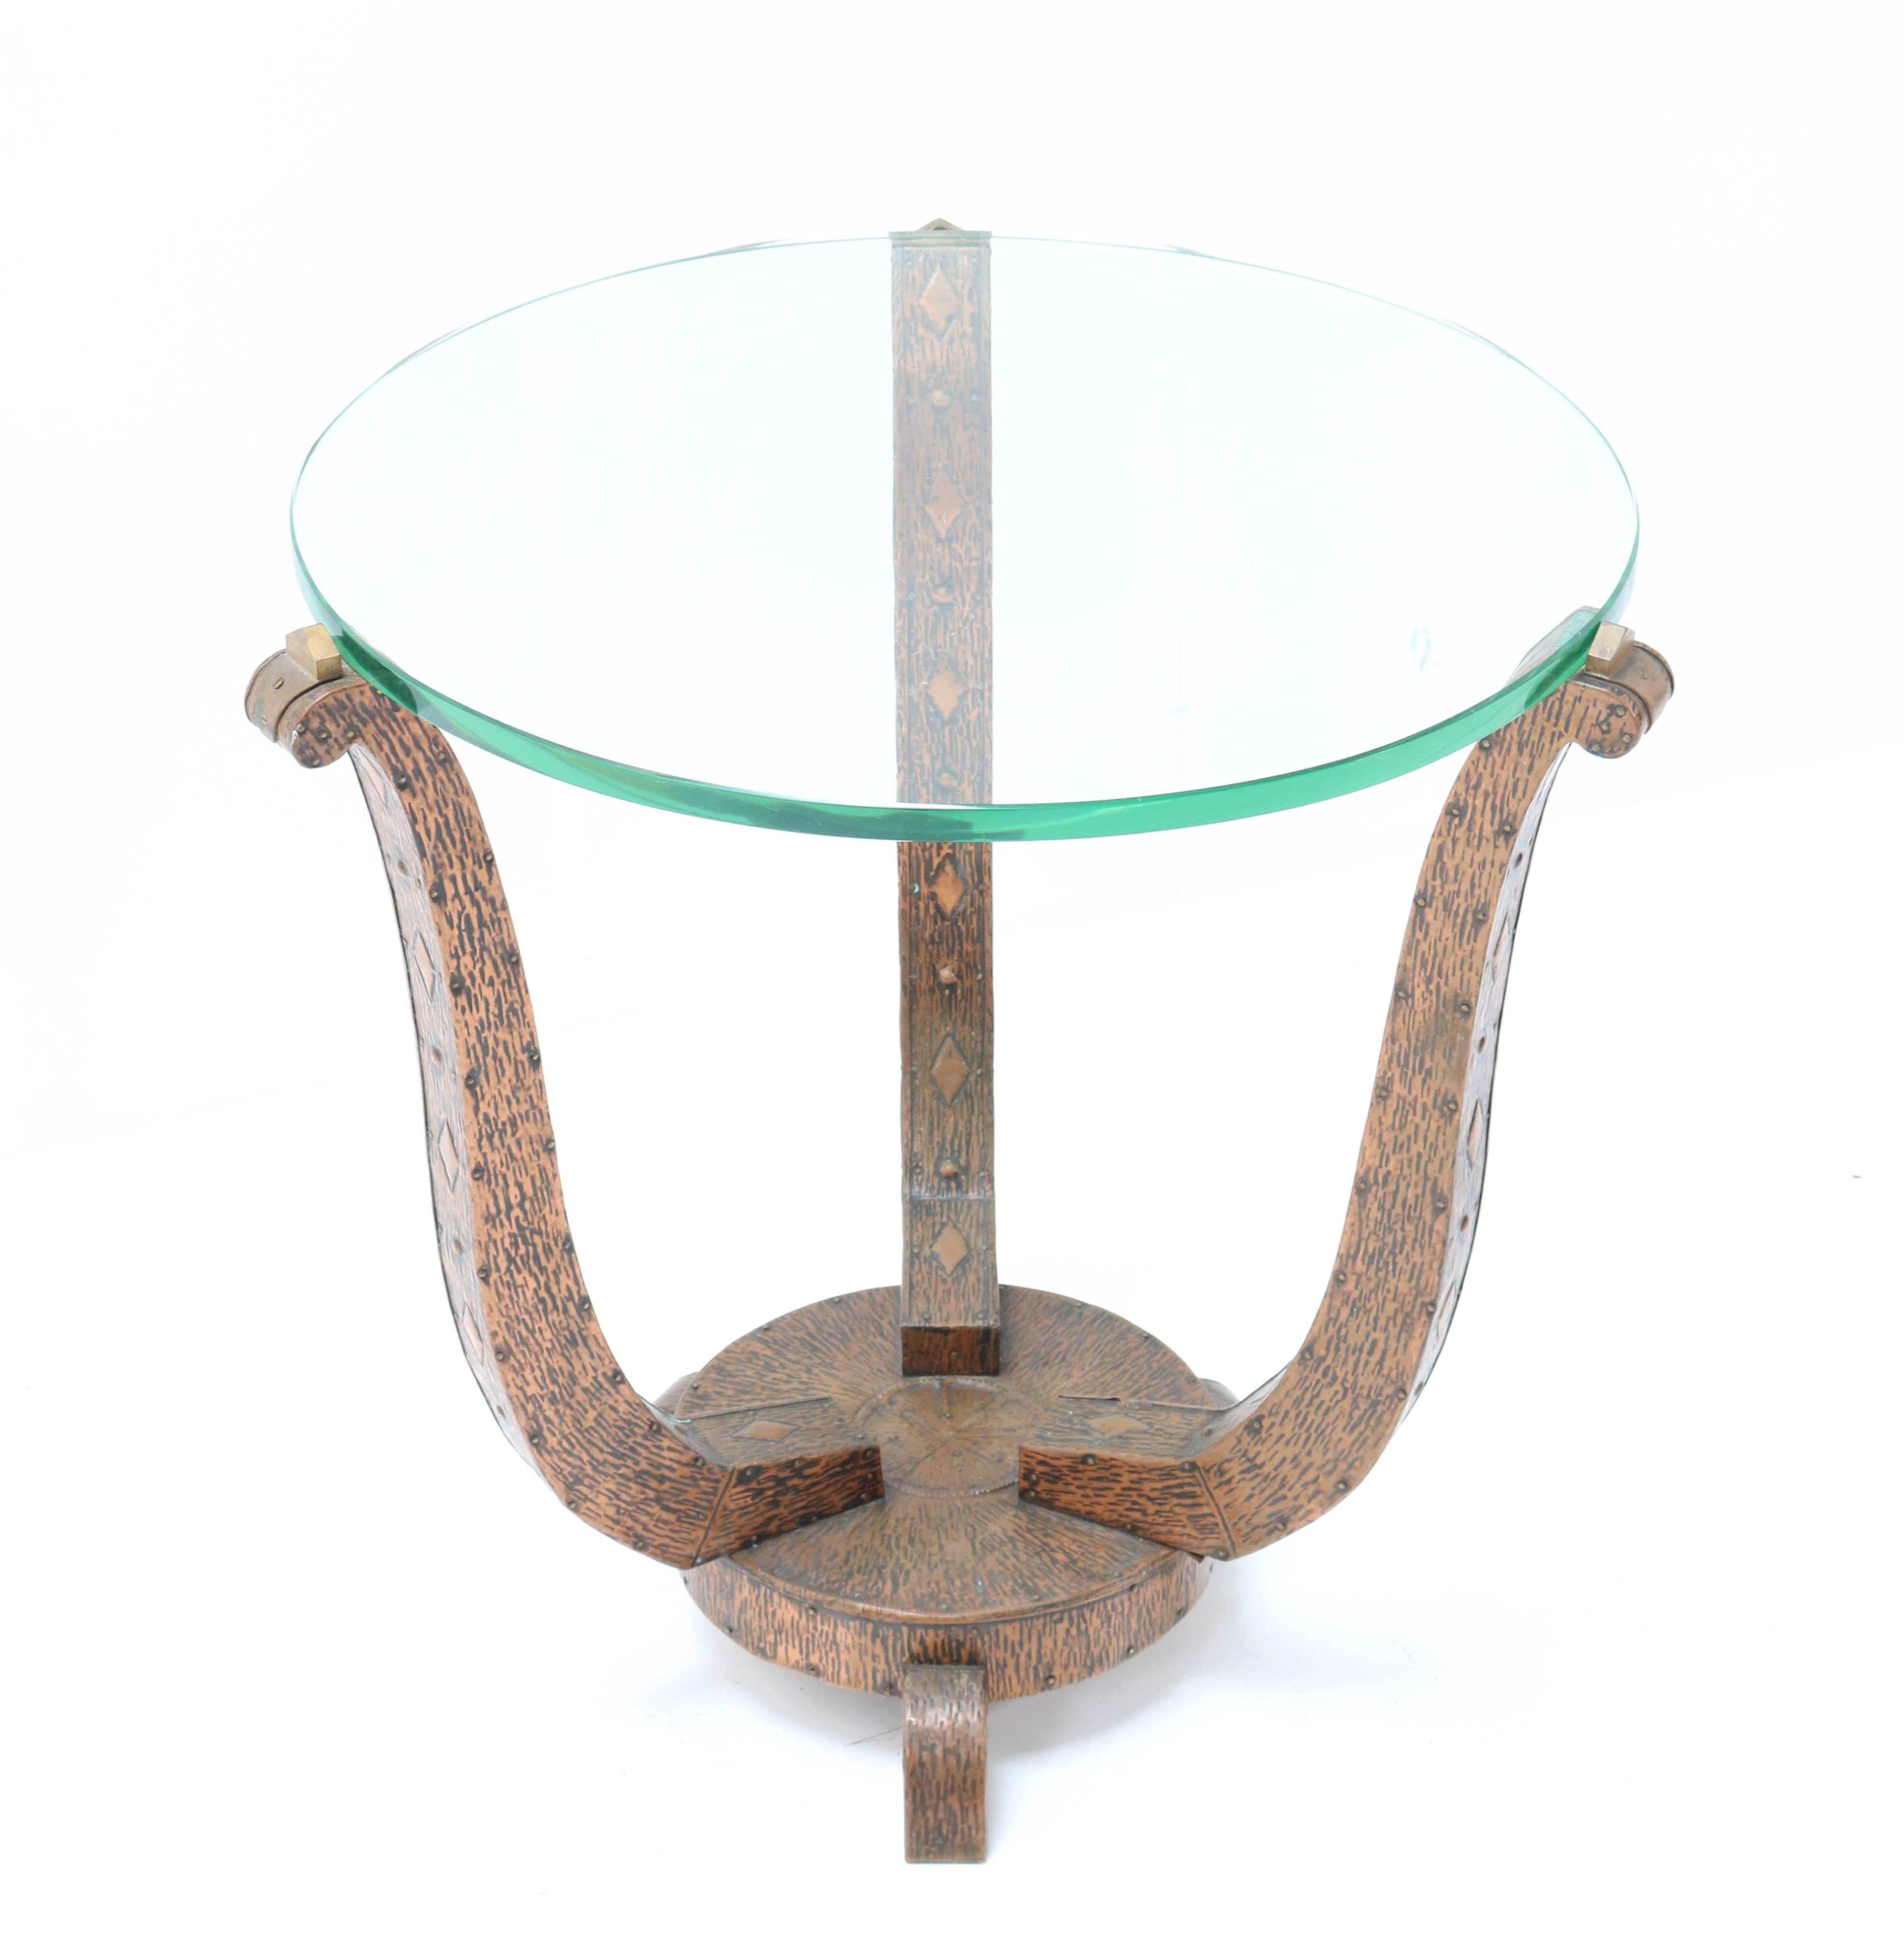 Mid-20th Century Patinated and Hammered Copper French Art Deco Gueridon Table, 1930s For Sale